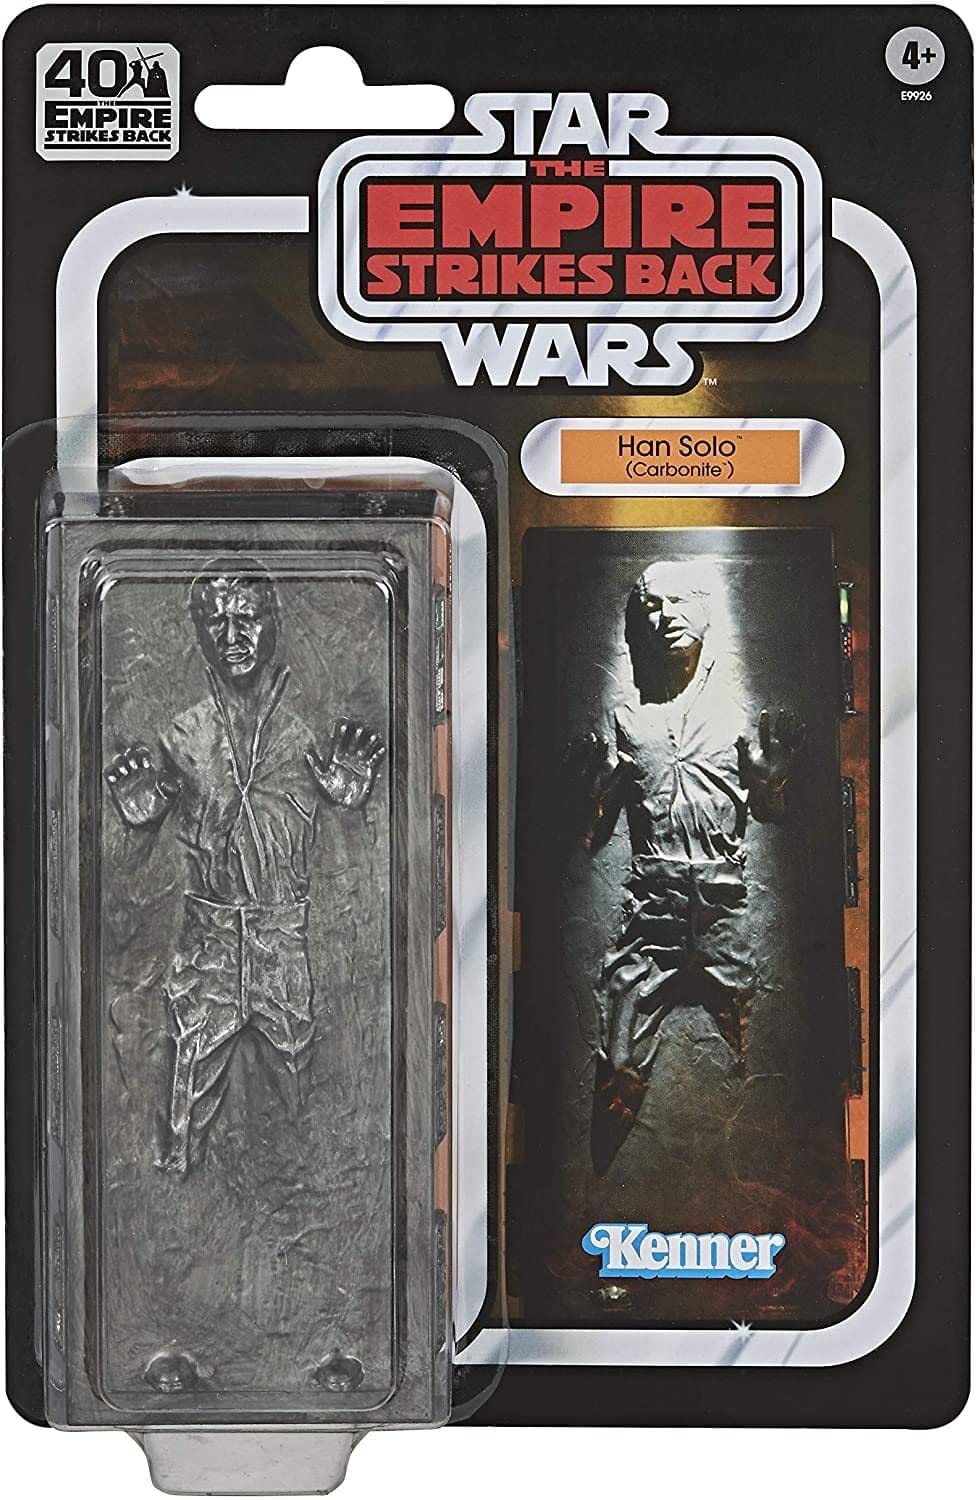 STAR WARS The Black Series Han Solo (Carbonite) 6-Inch-Scale The Empire Strikes Back 40TH Anniversary Collectible Figure with Stand (Amazon Exclusive)